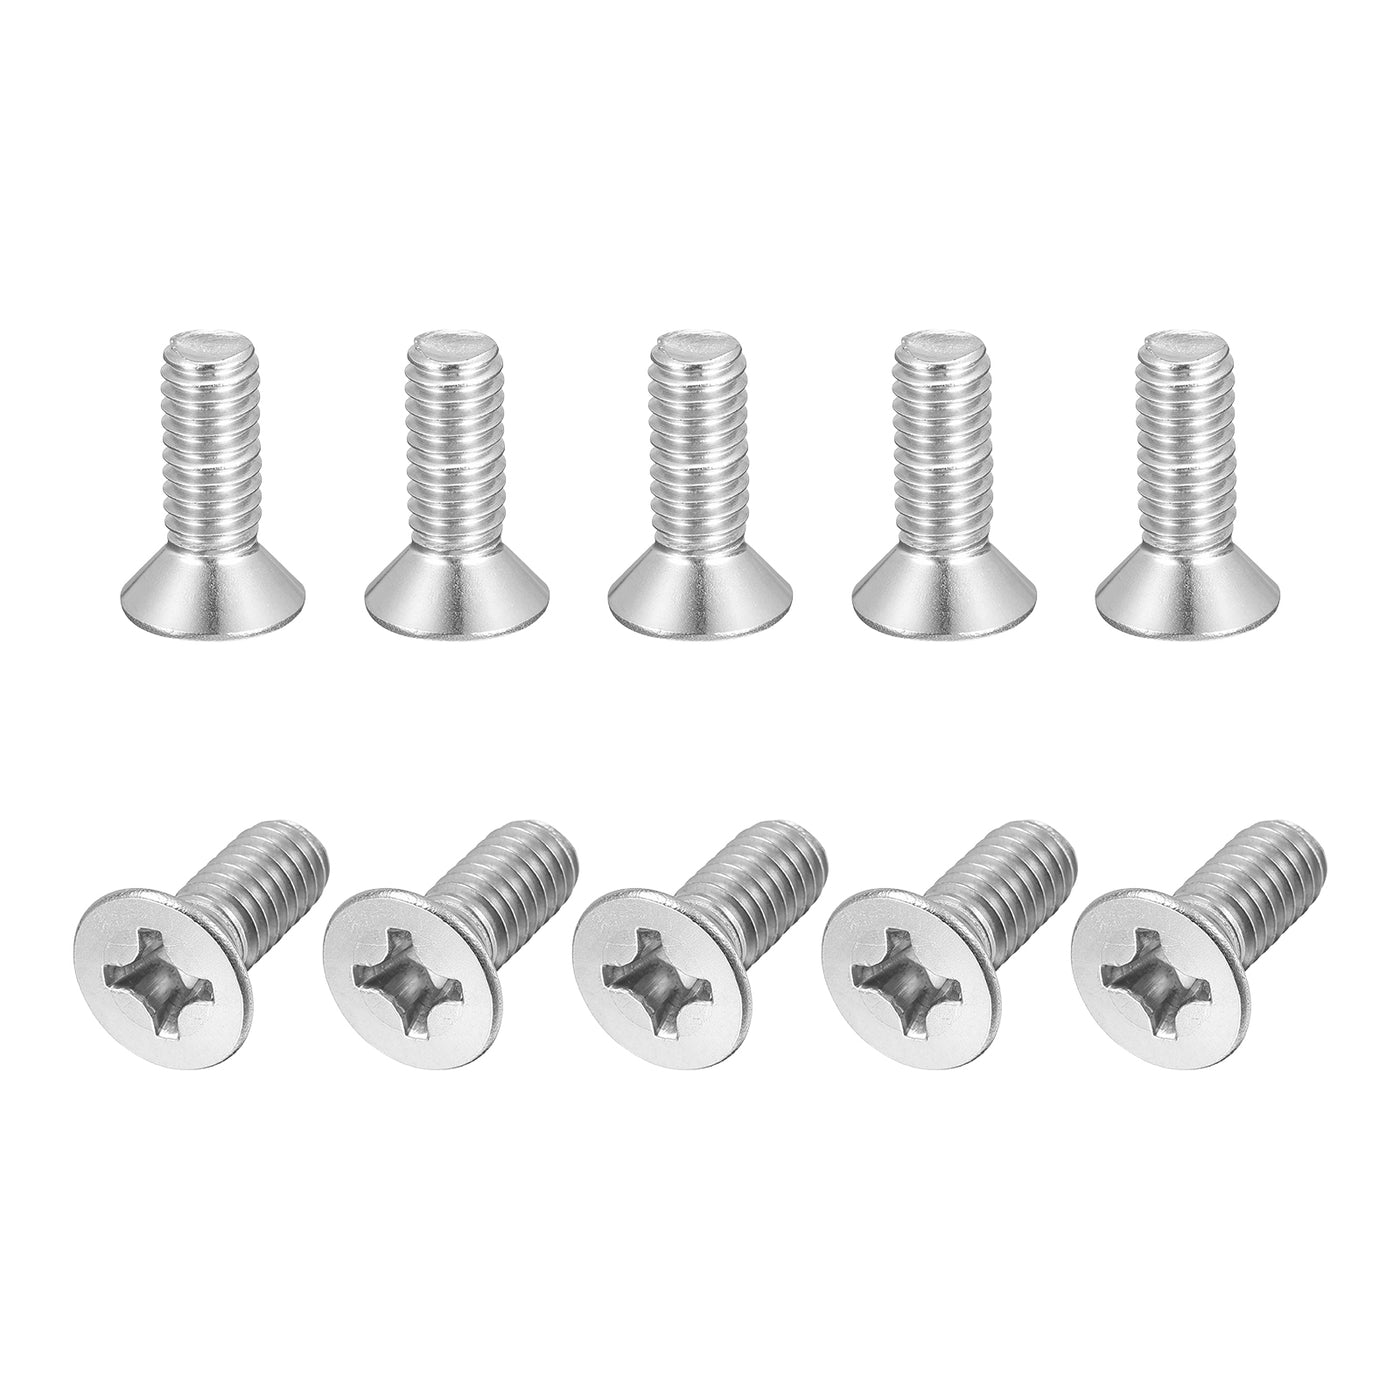 uxcell Uxcell 5/16-18x1" Flat Head Machine Screws Phillips 304 Stainless Steel Bolts 10pcs